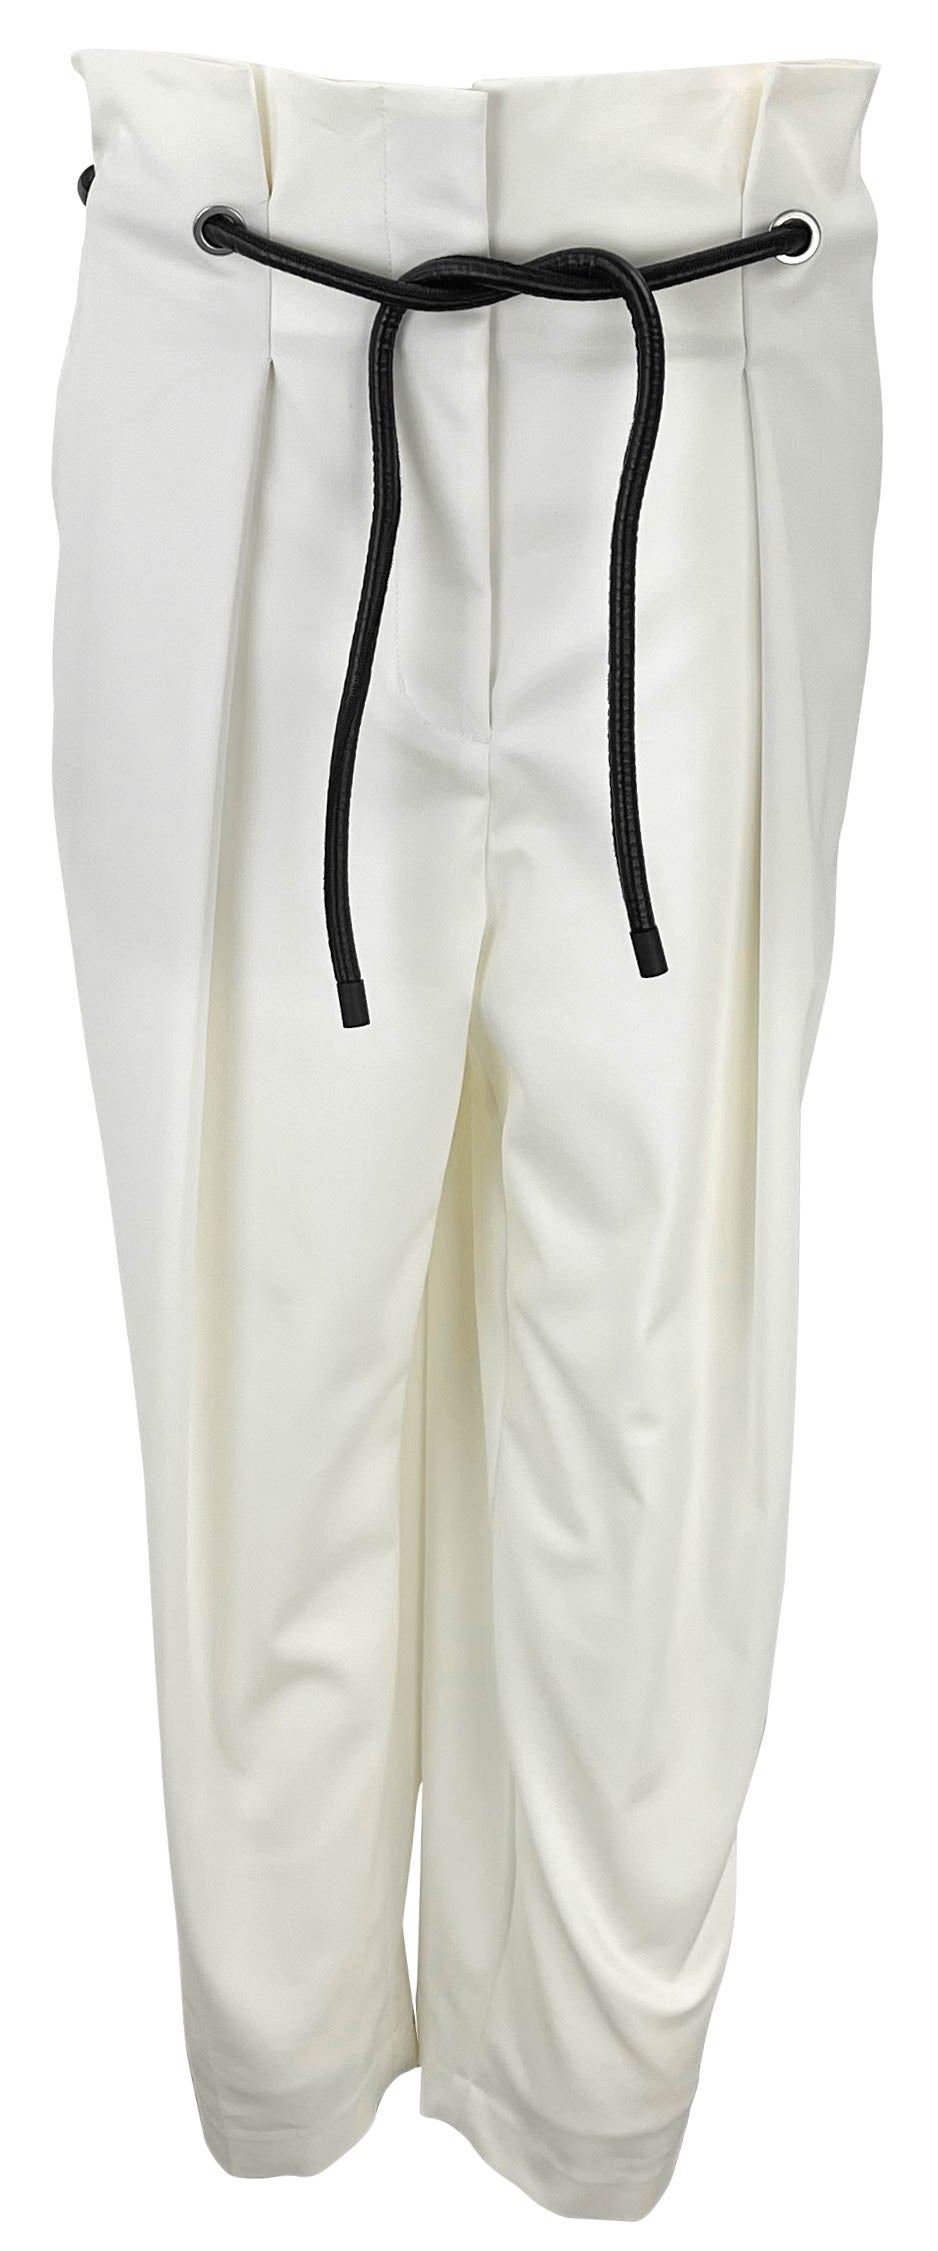 Phillip Lim Pleated Trousers in Off White - Discounts on Phillip Lim at UAL